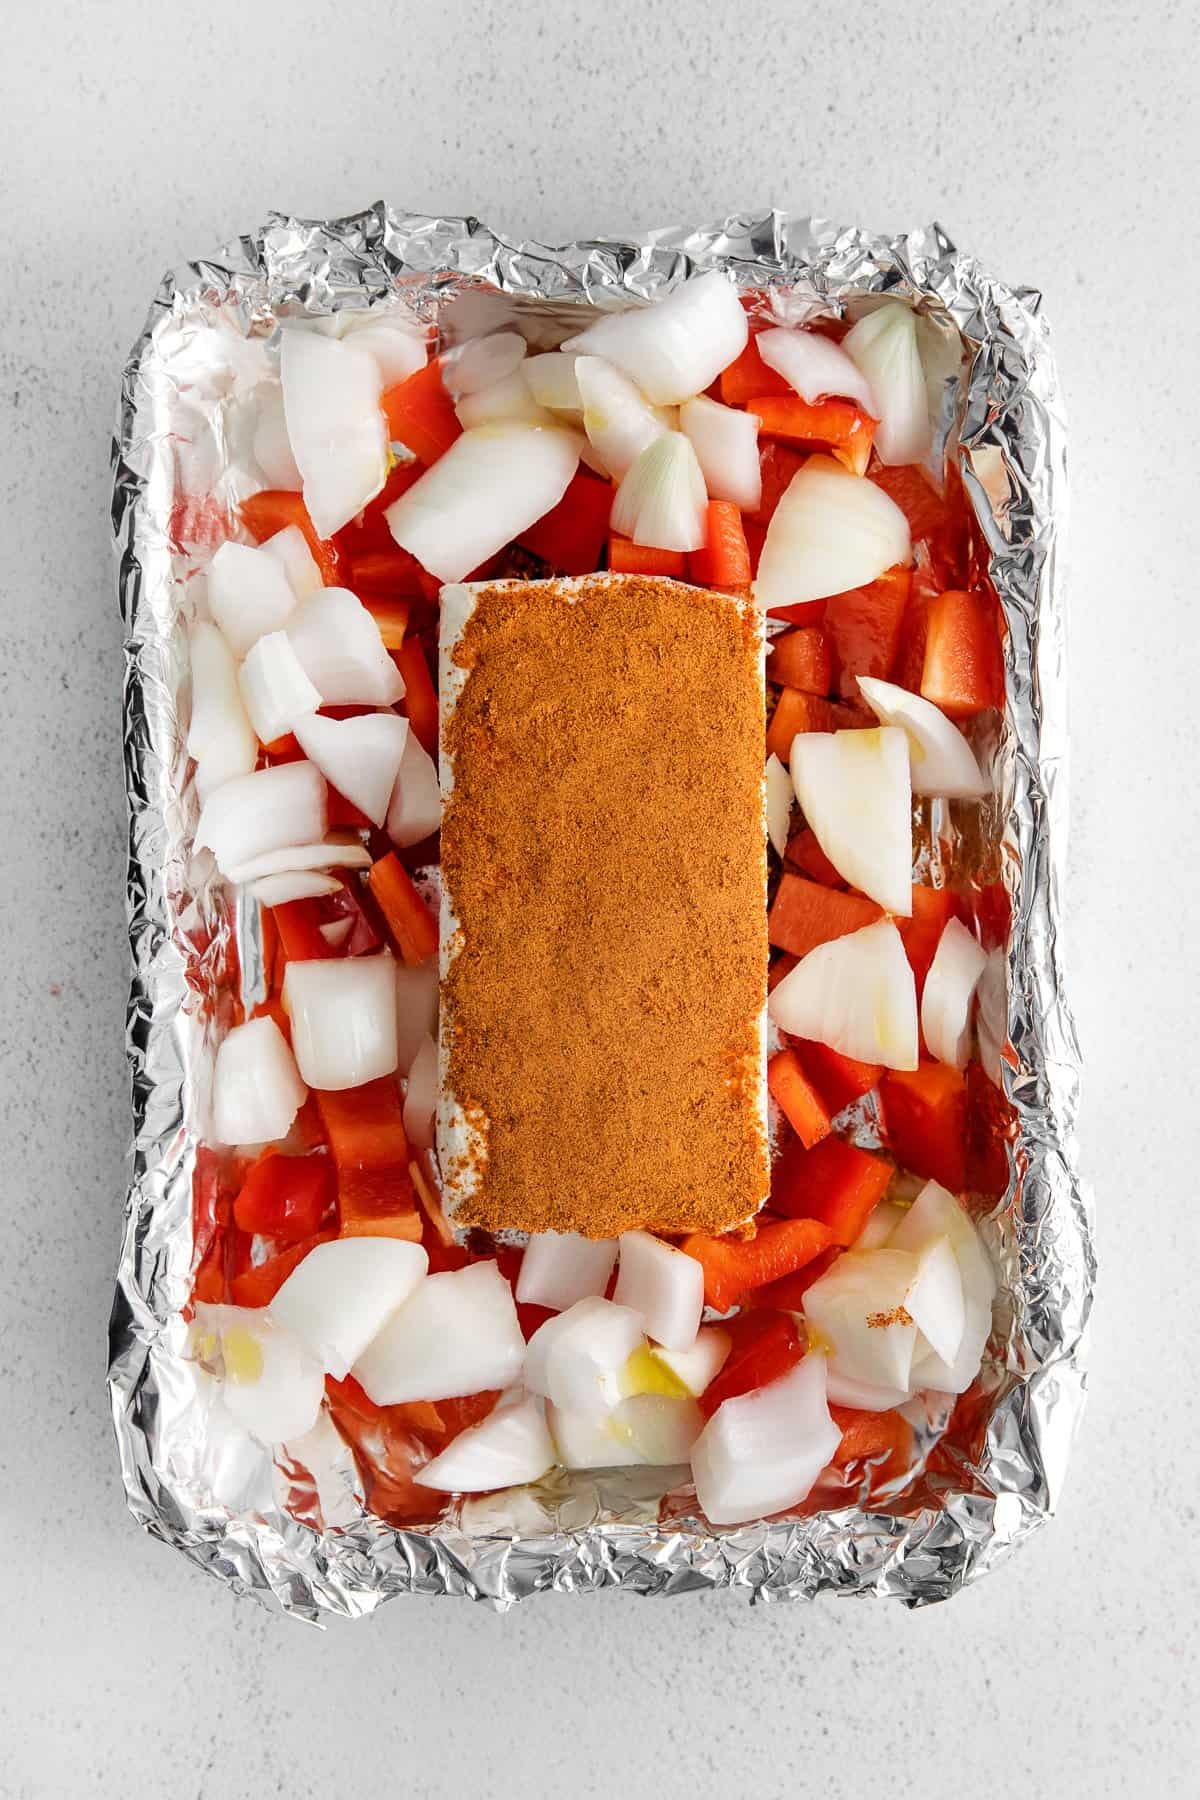 Smoked cream cheese on a tin foil boat surrounded by veggies.